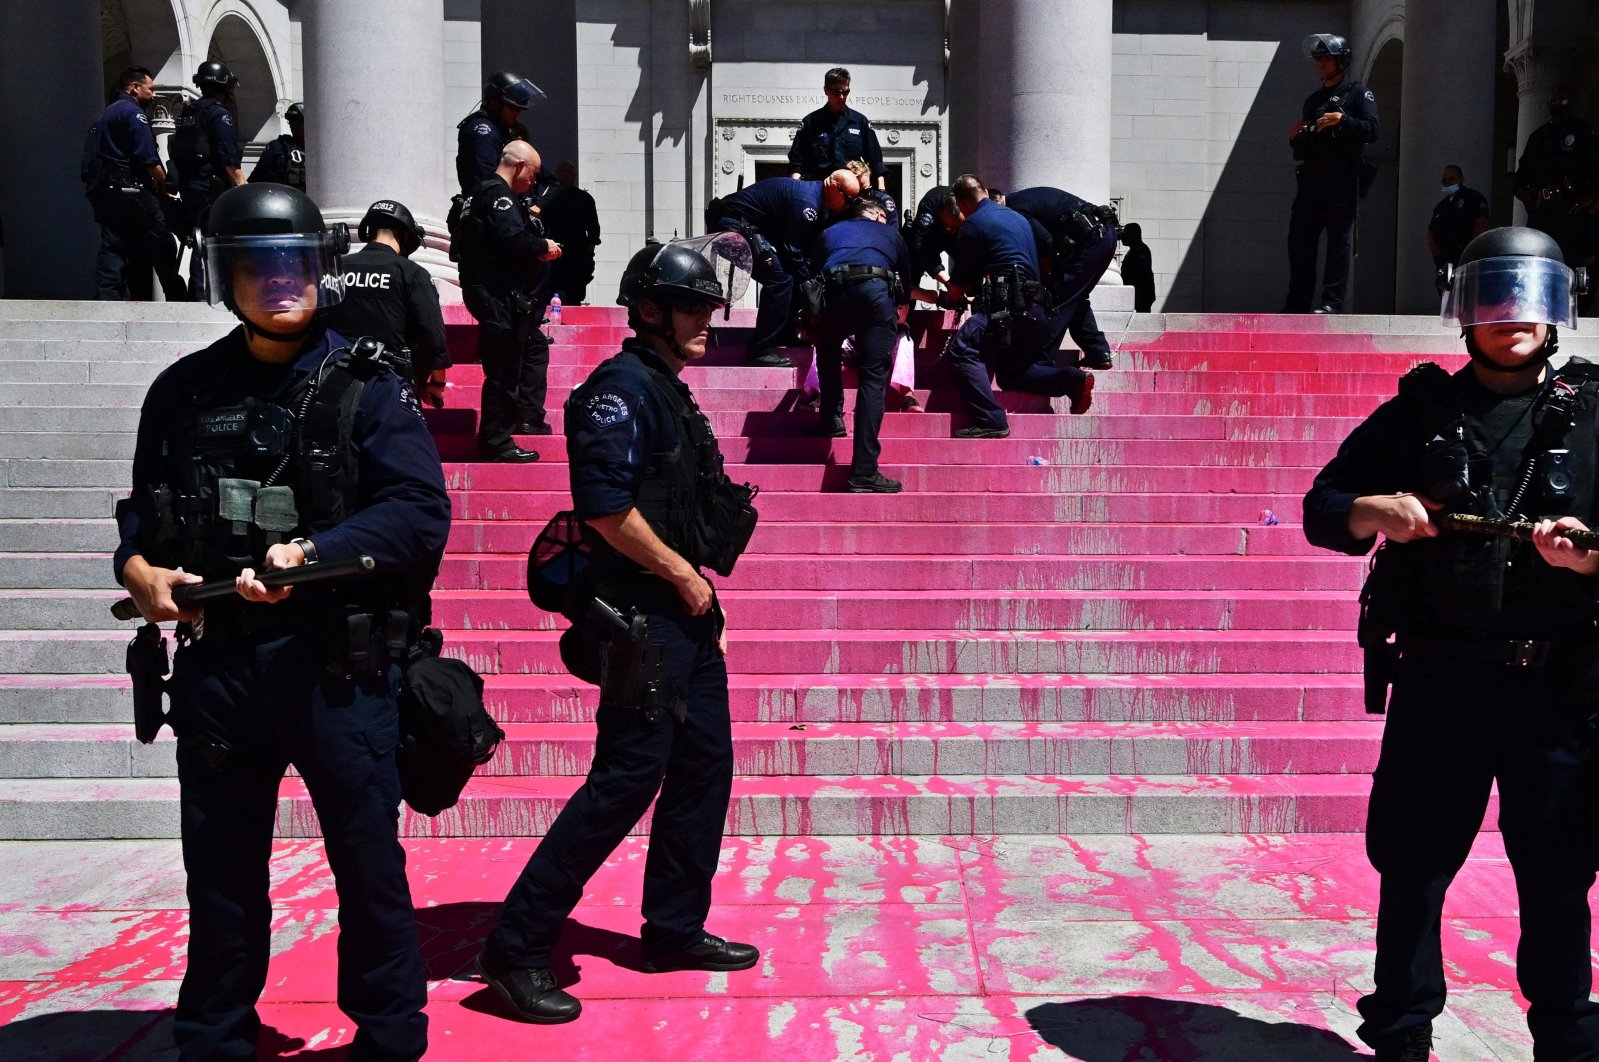 Police officers in riot gear stand near red paint splattered on the steps of City Hall as abortion-rights activists holding a protest to demand the government restore nationwide abortion rights are arrested, Los Angeles, California, U.S., July 6, 2022. (AFP Photo)